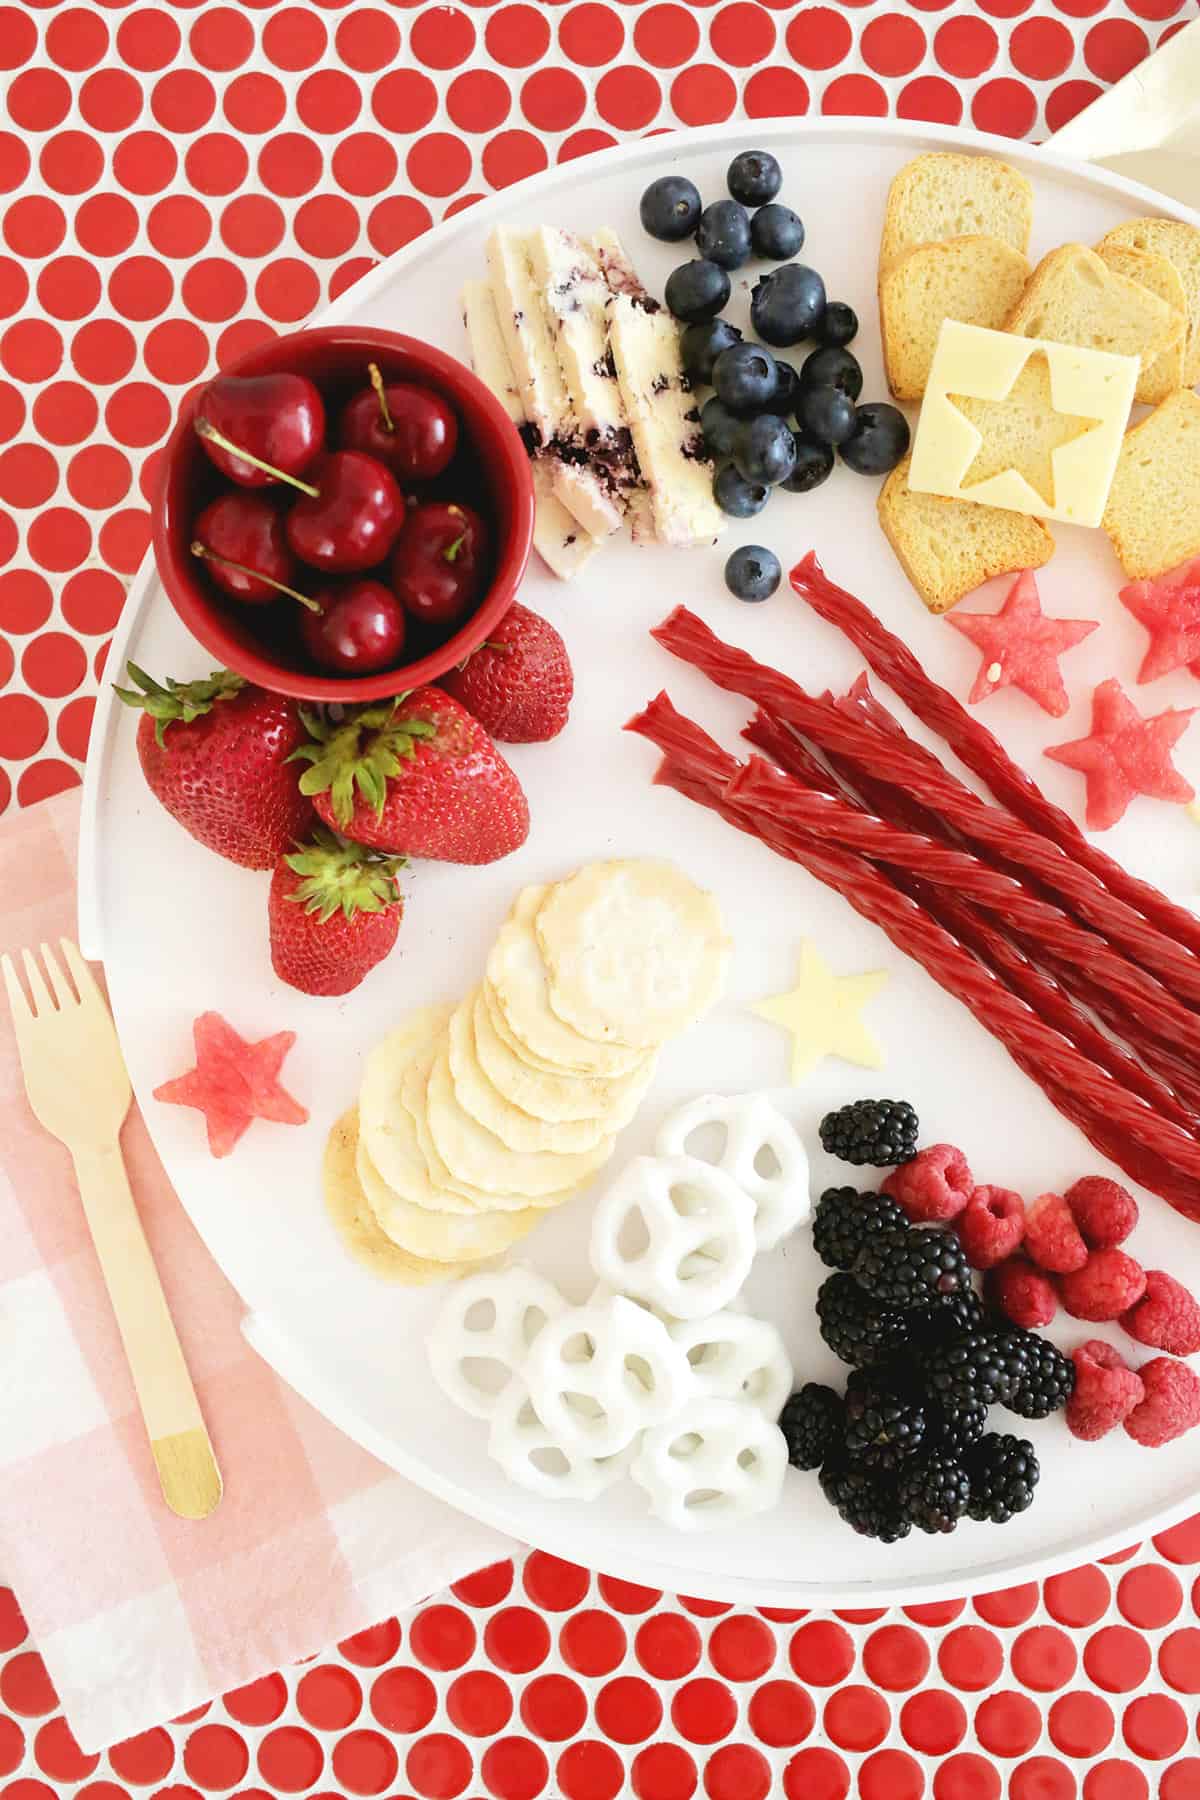 Cheese Platter - How to Make a Board the Kids Will Love!